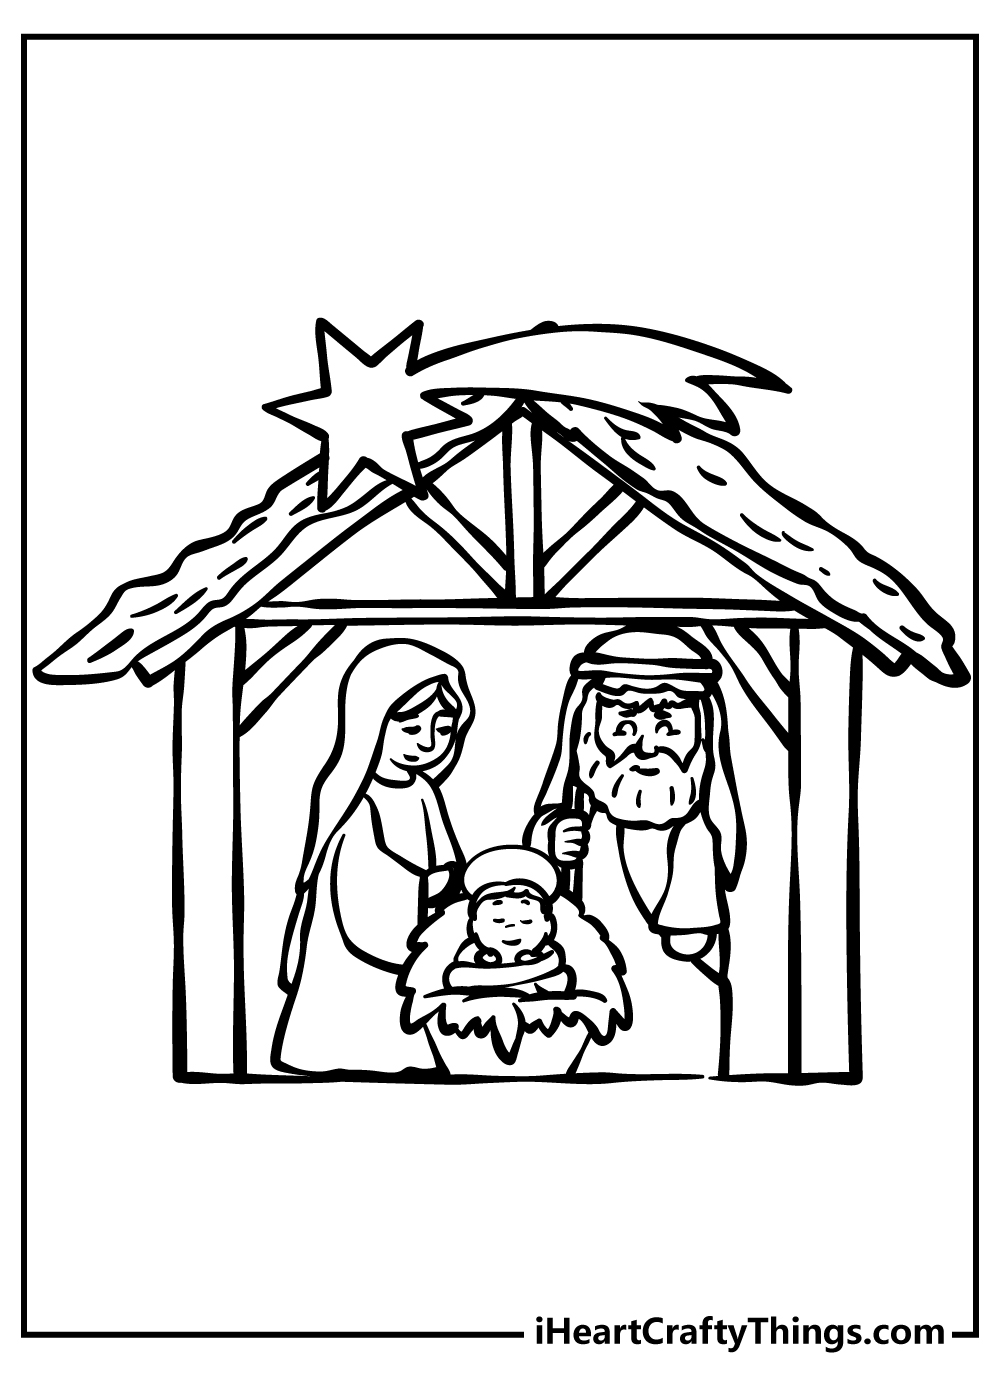 Nativity Coloring Pages free pdf download